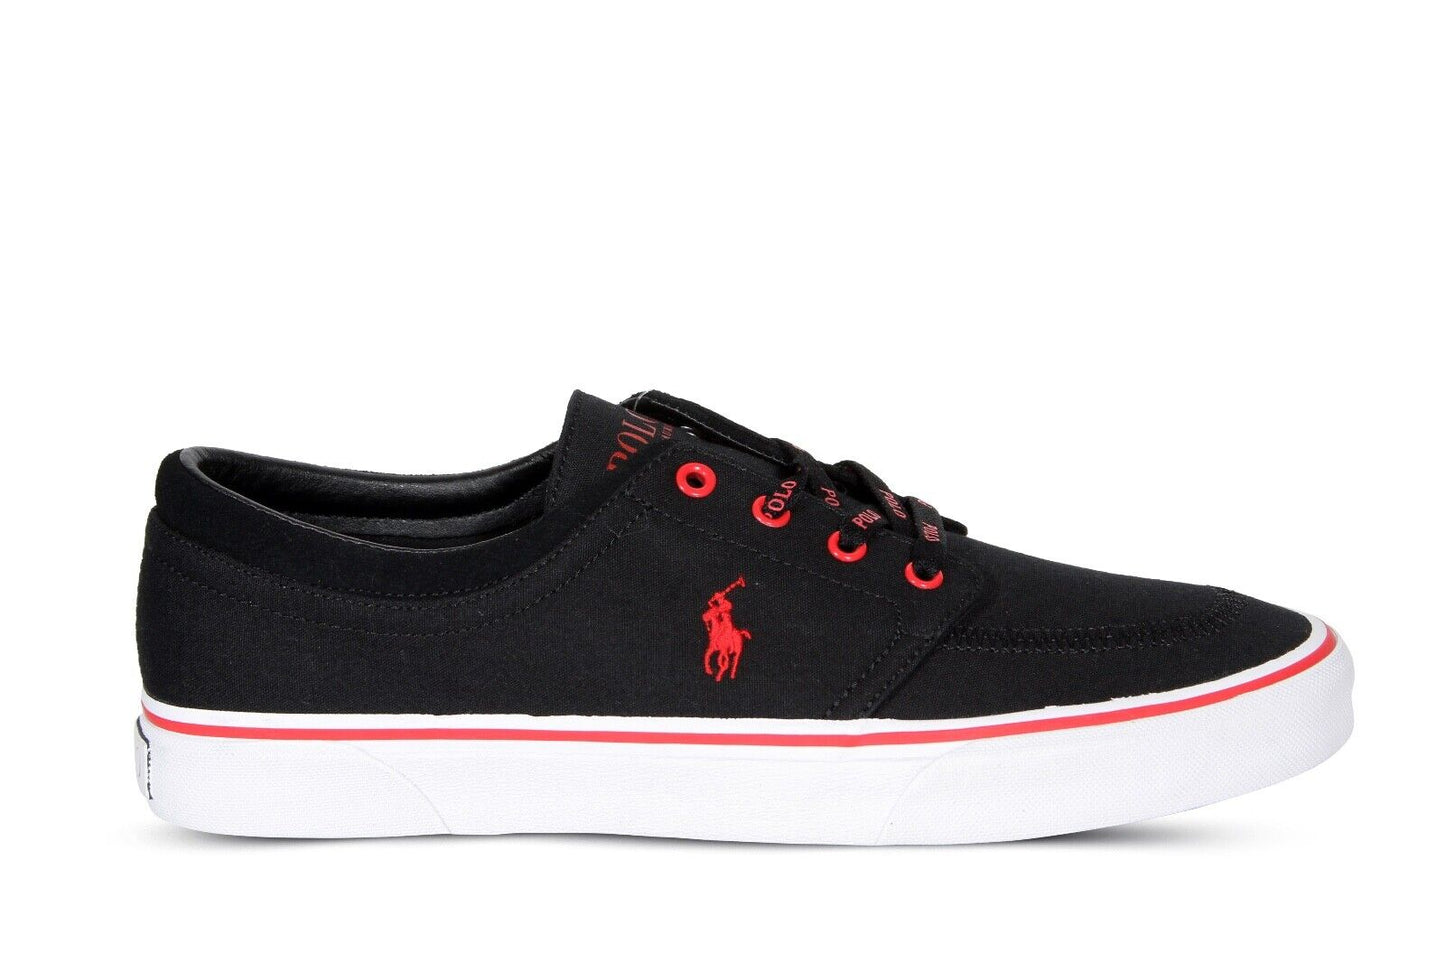 Polo Ralph Lauren Faxon X Men’s Canvas Sneakers in Black and Red 816841214002